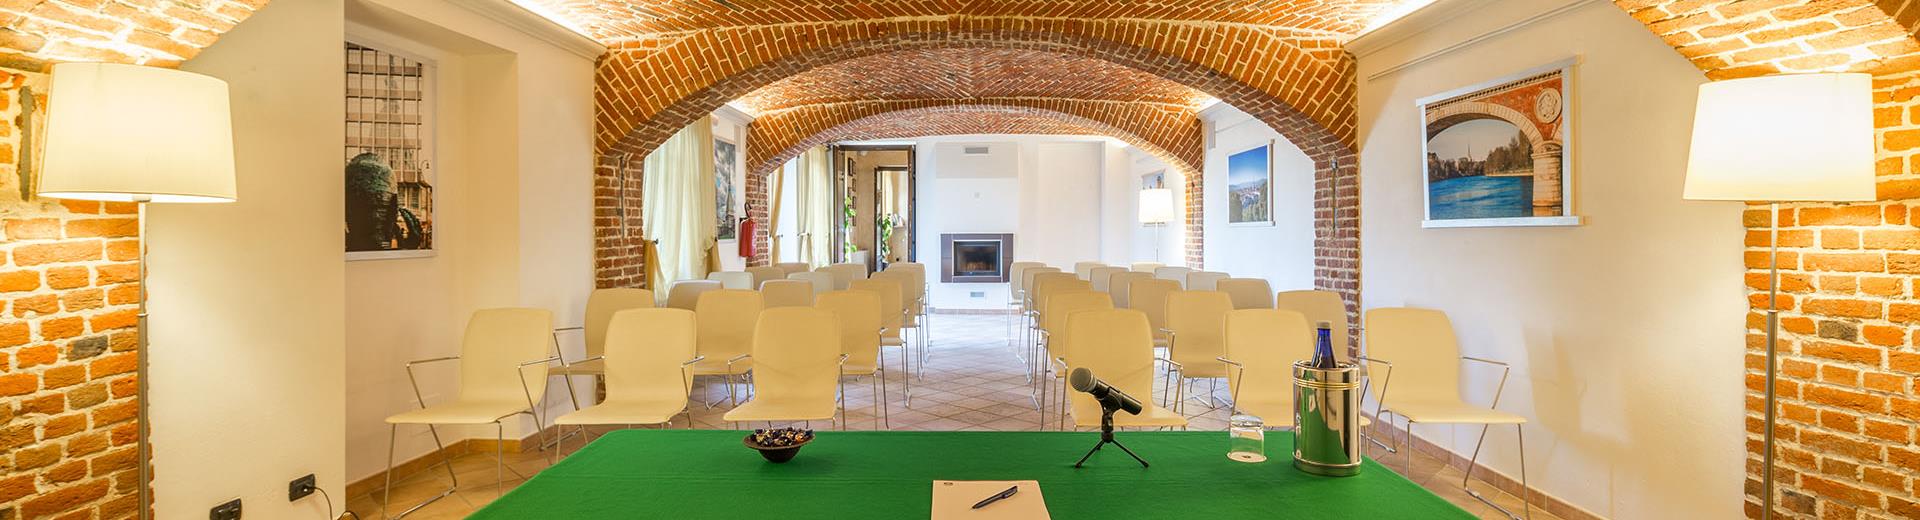 Meeting room 5 minutes from Turin Caselle airport. Ideal for conferences, team building, talks, brunches, light lunches and aperitifs